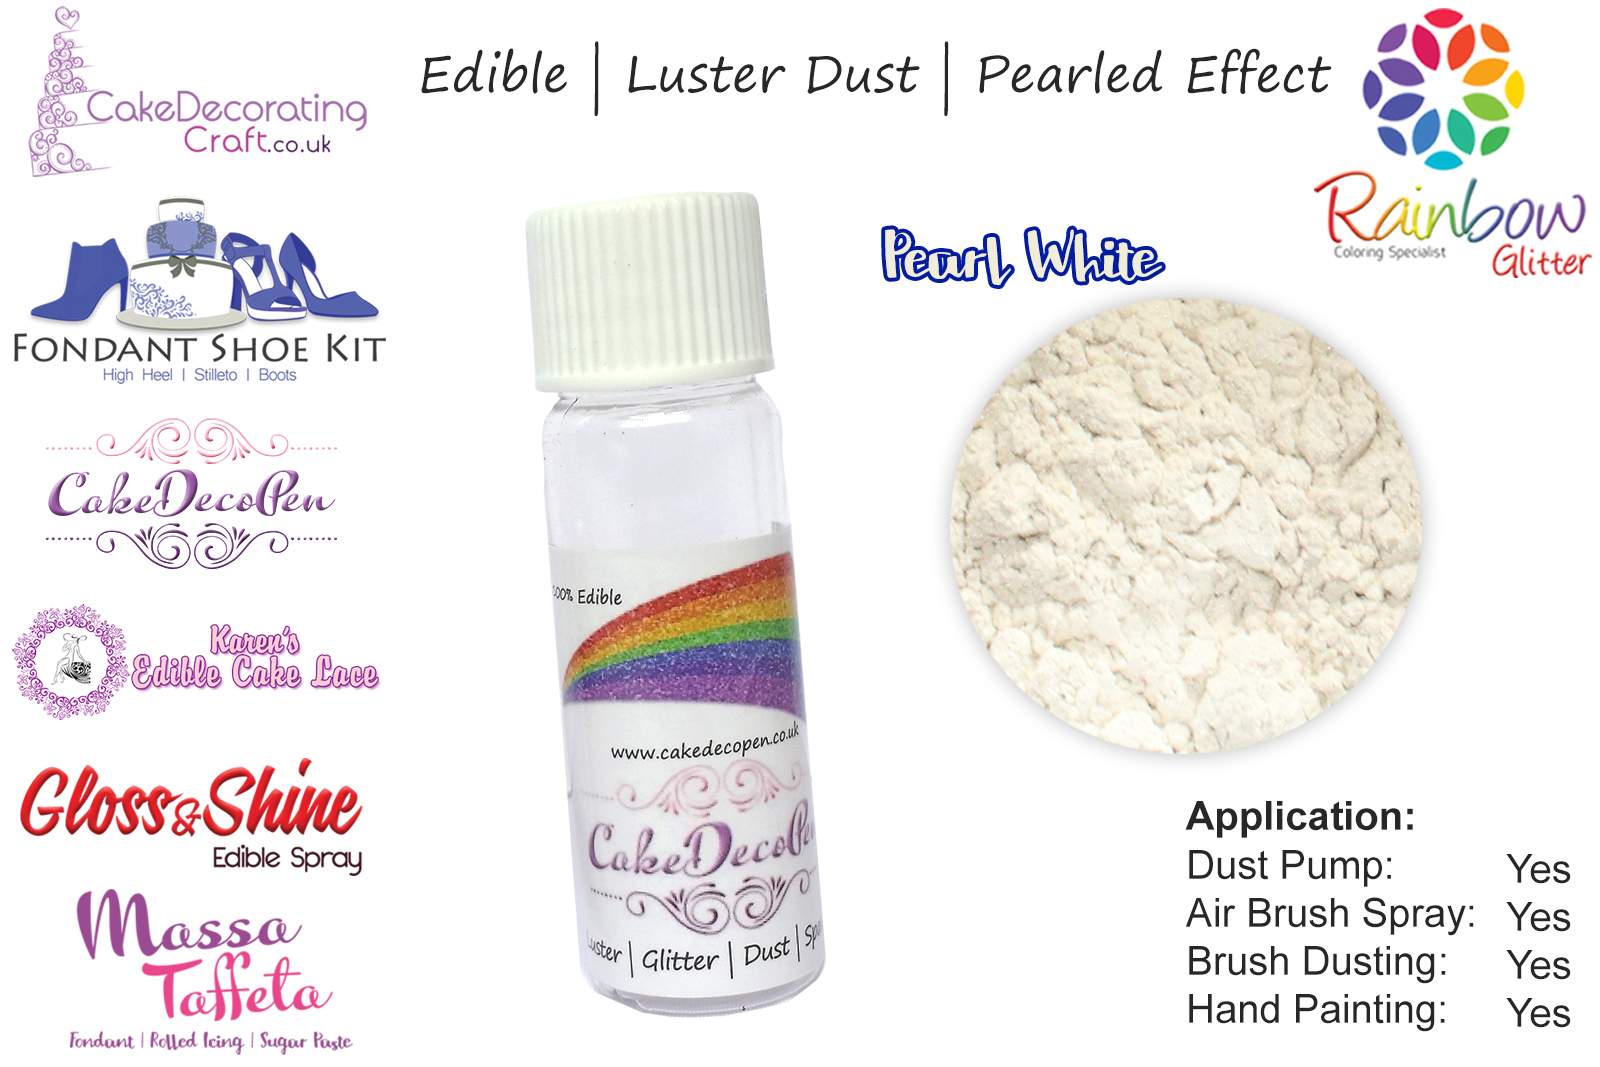 Pearl White | Pearled | Luster | Shimmer | Gloss | Edible Dust | 25 Gram Pot | Cake Decorating Craft